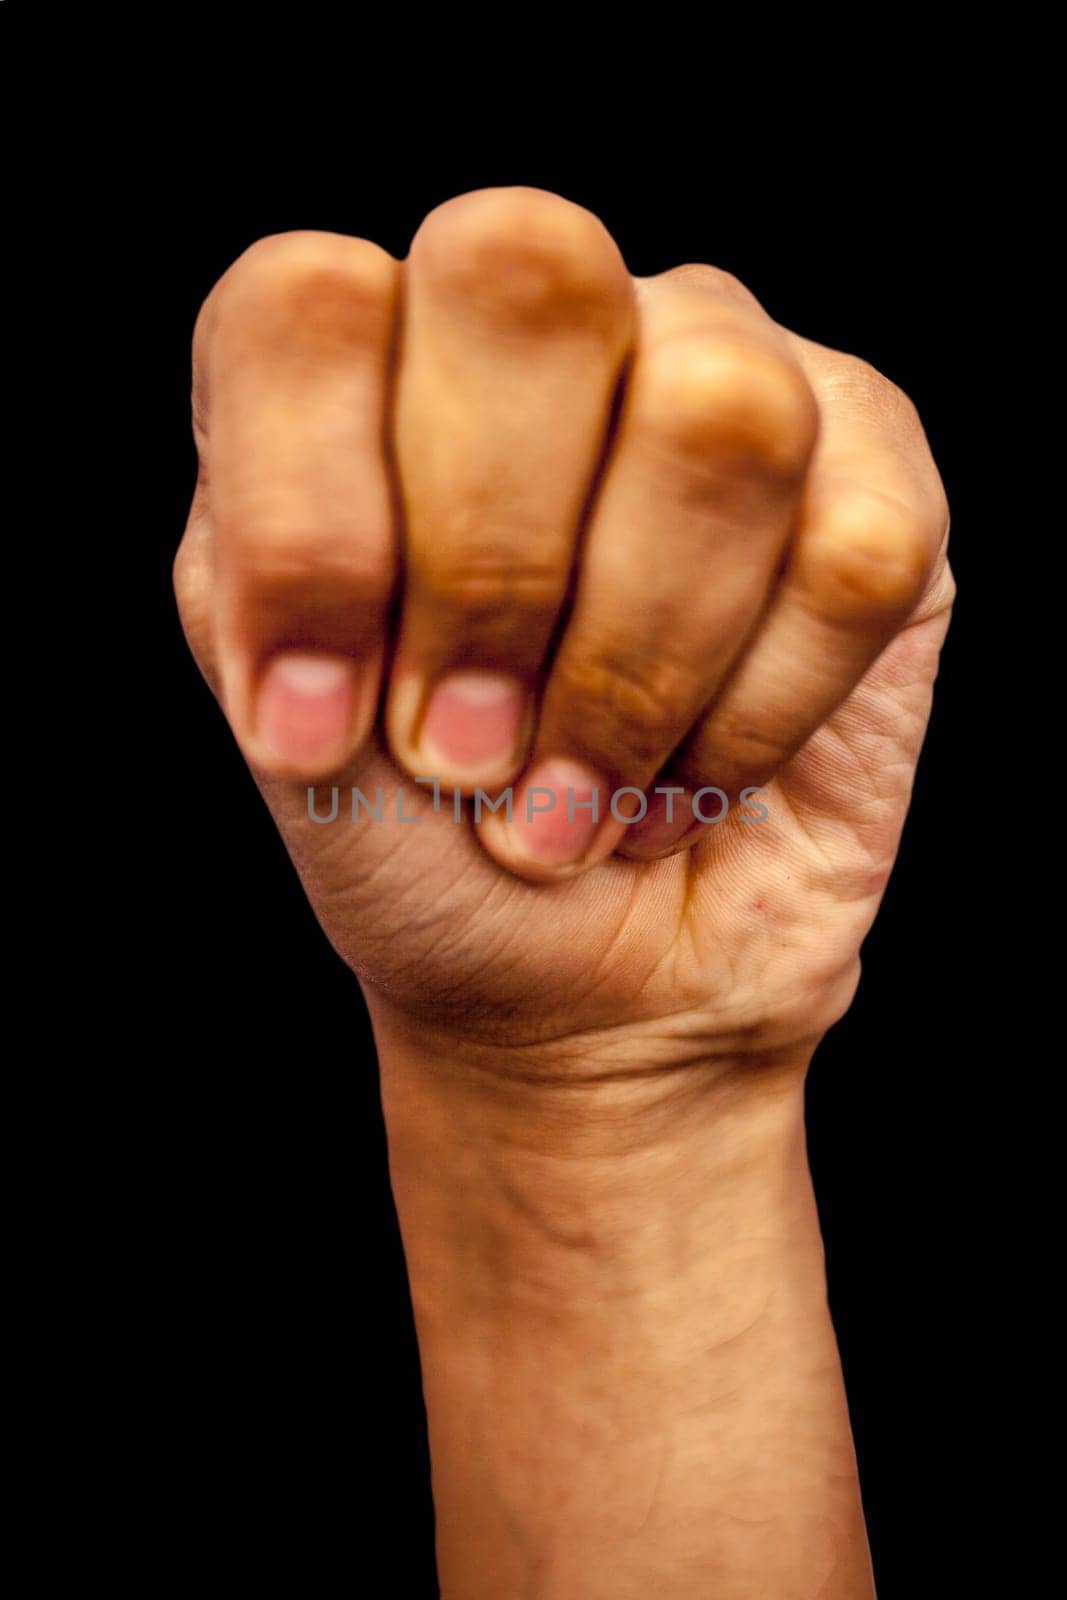 Mushti Yoga Mudra is demonstrated by a single male hand isolated against a black background.